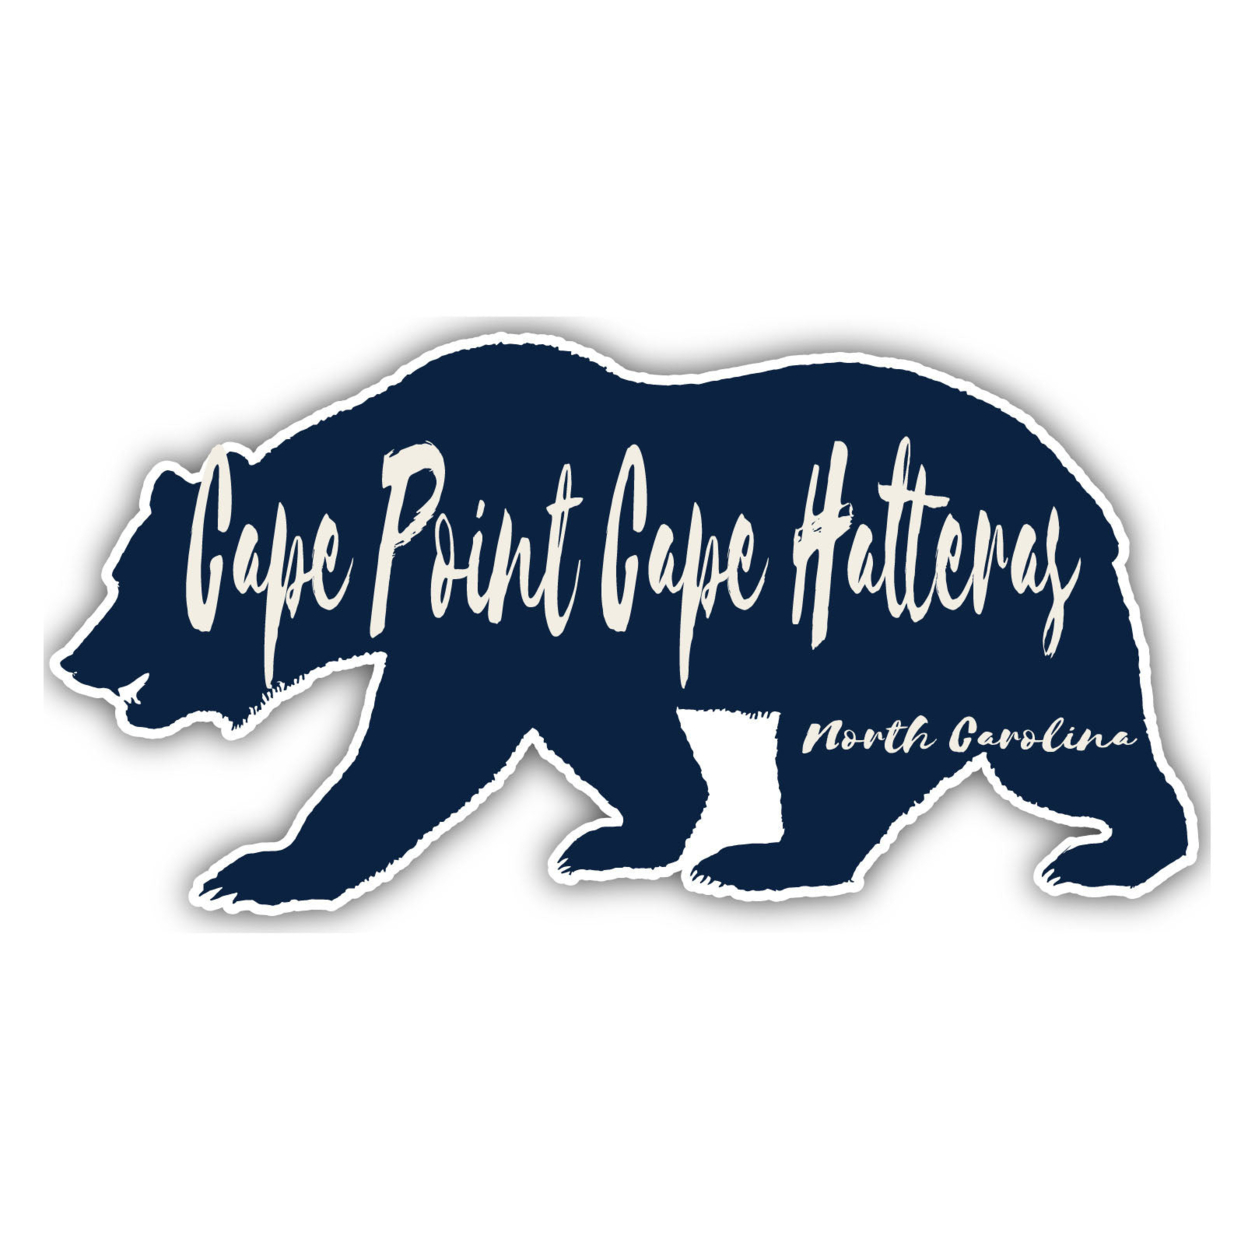 Cape Point Cape Hatteras North Carolina Souvenir Decorative Stickers (Choose Theme And Size) - 4-Pack, 10-Inch, Bear